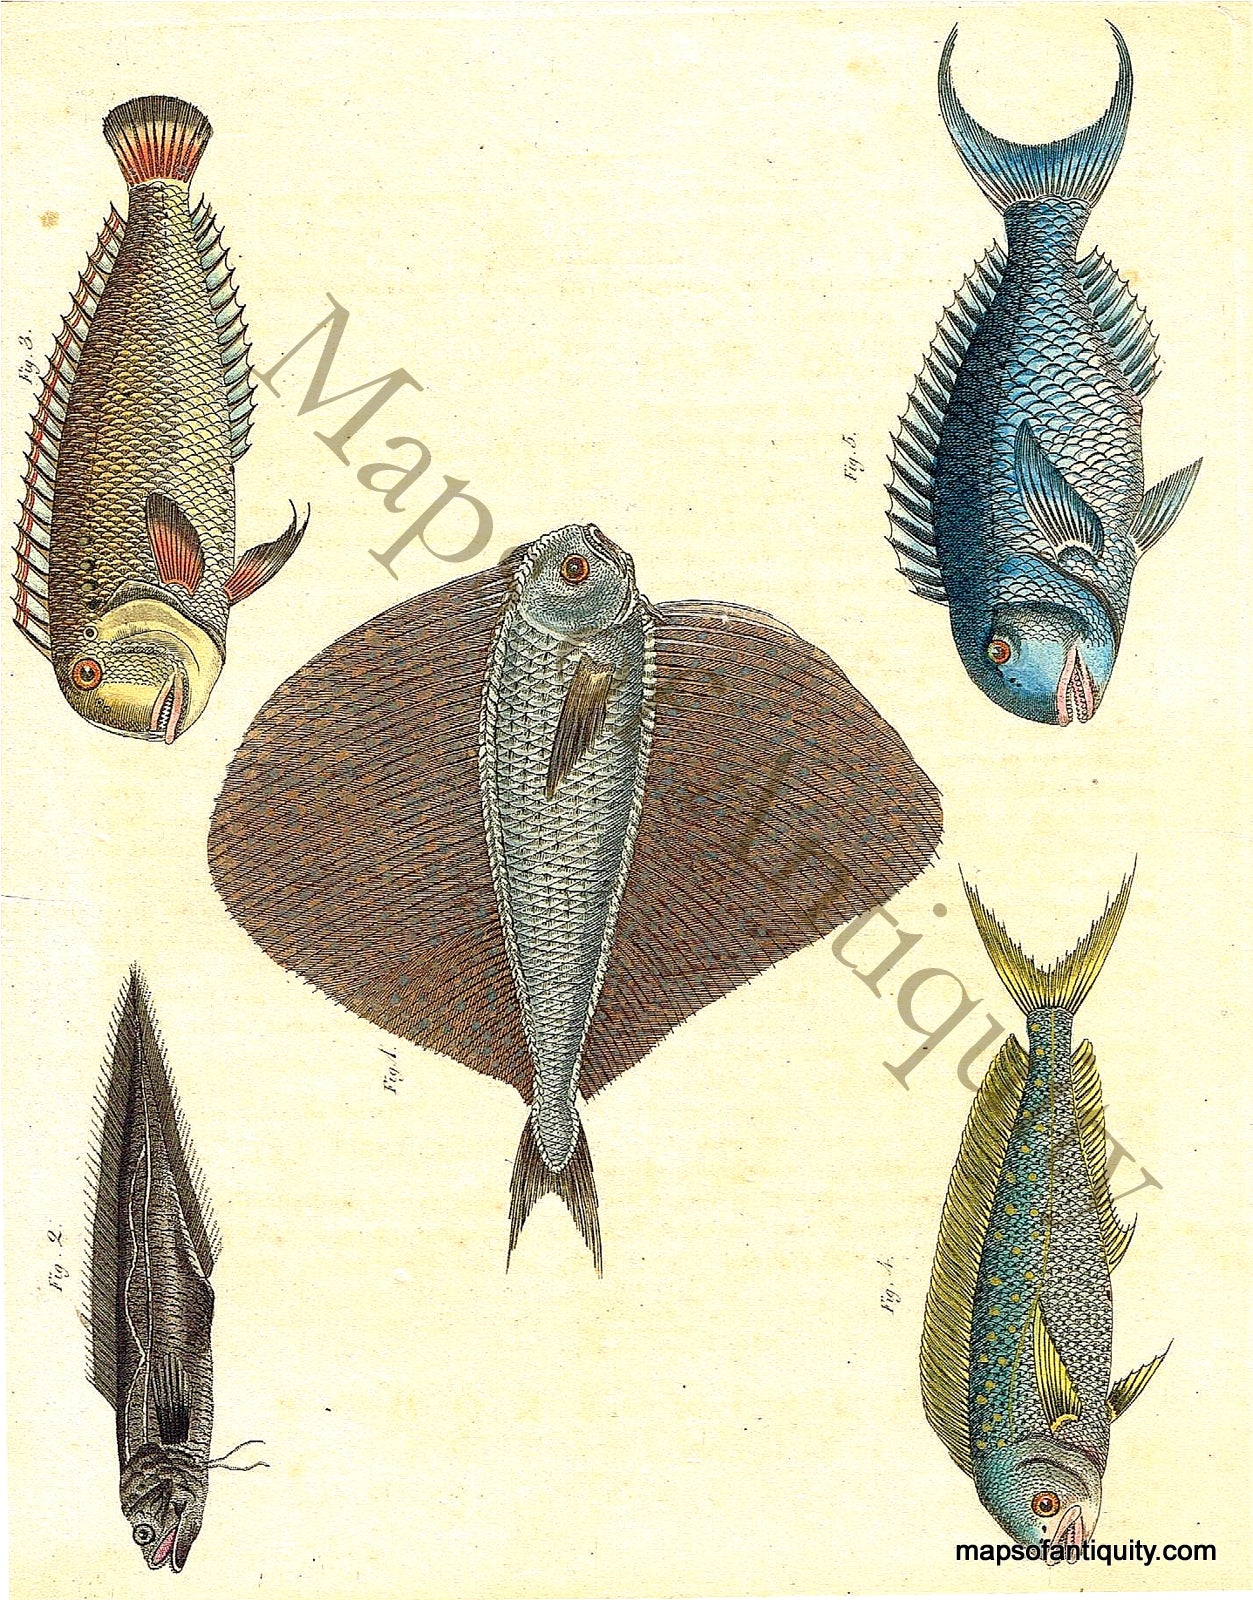 Hand-colored-engraving-Fish-Natural-History-Prints--c.-1800-unknown-Maps-Of-Antiquity